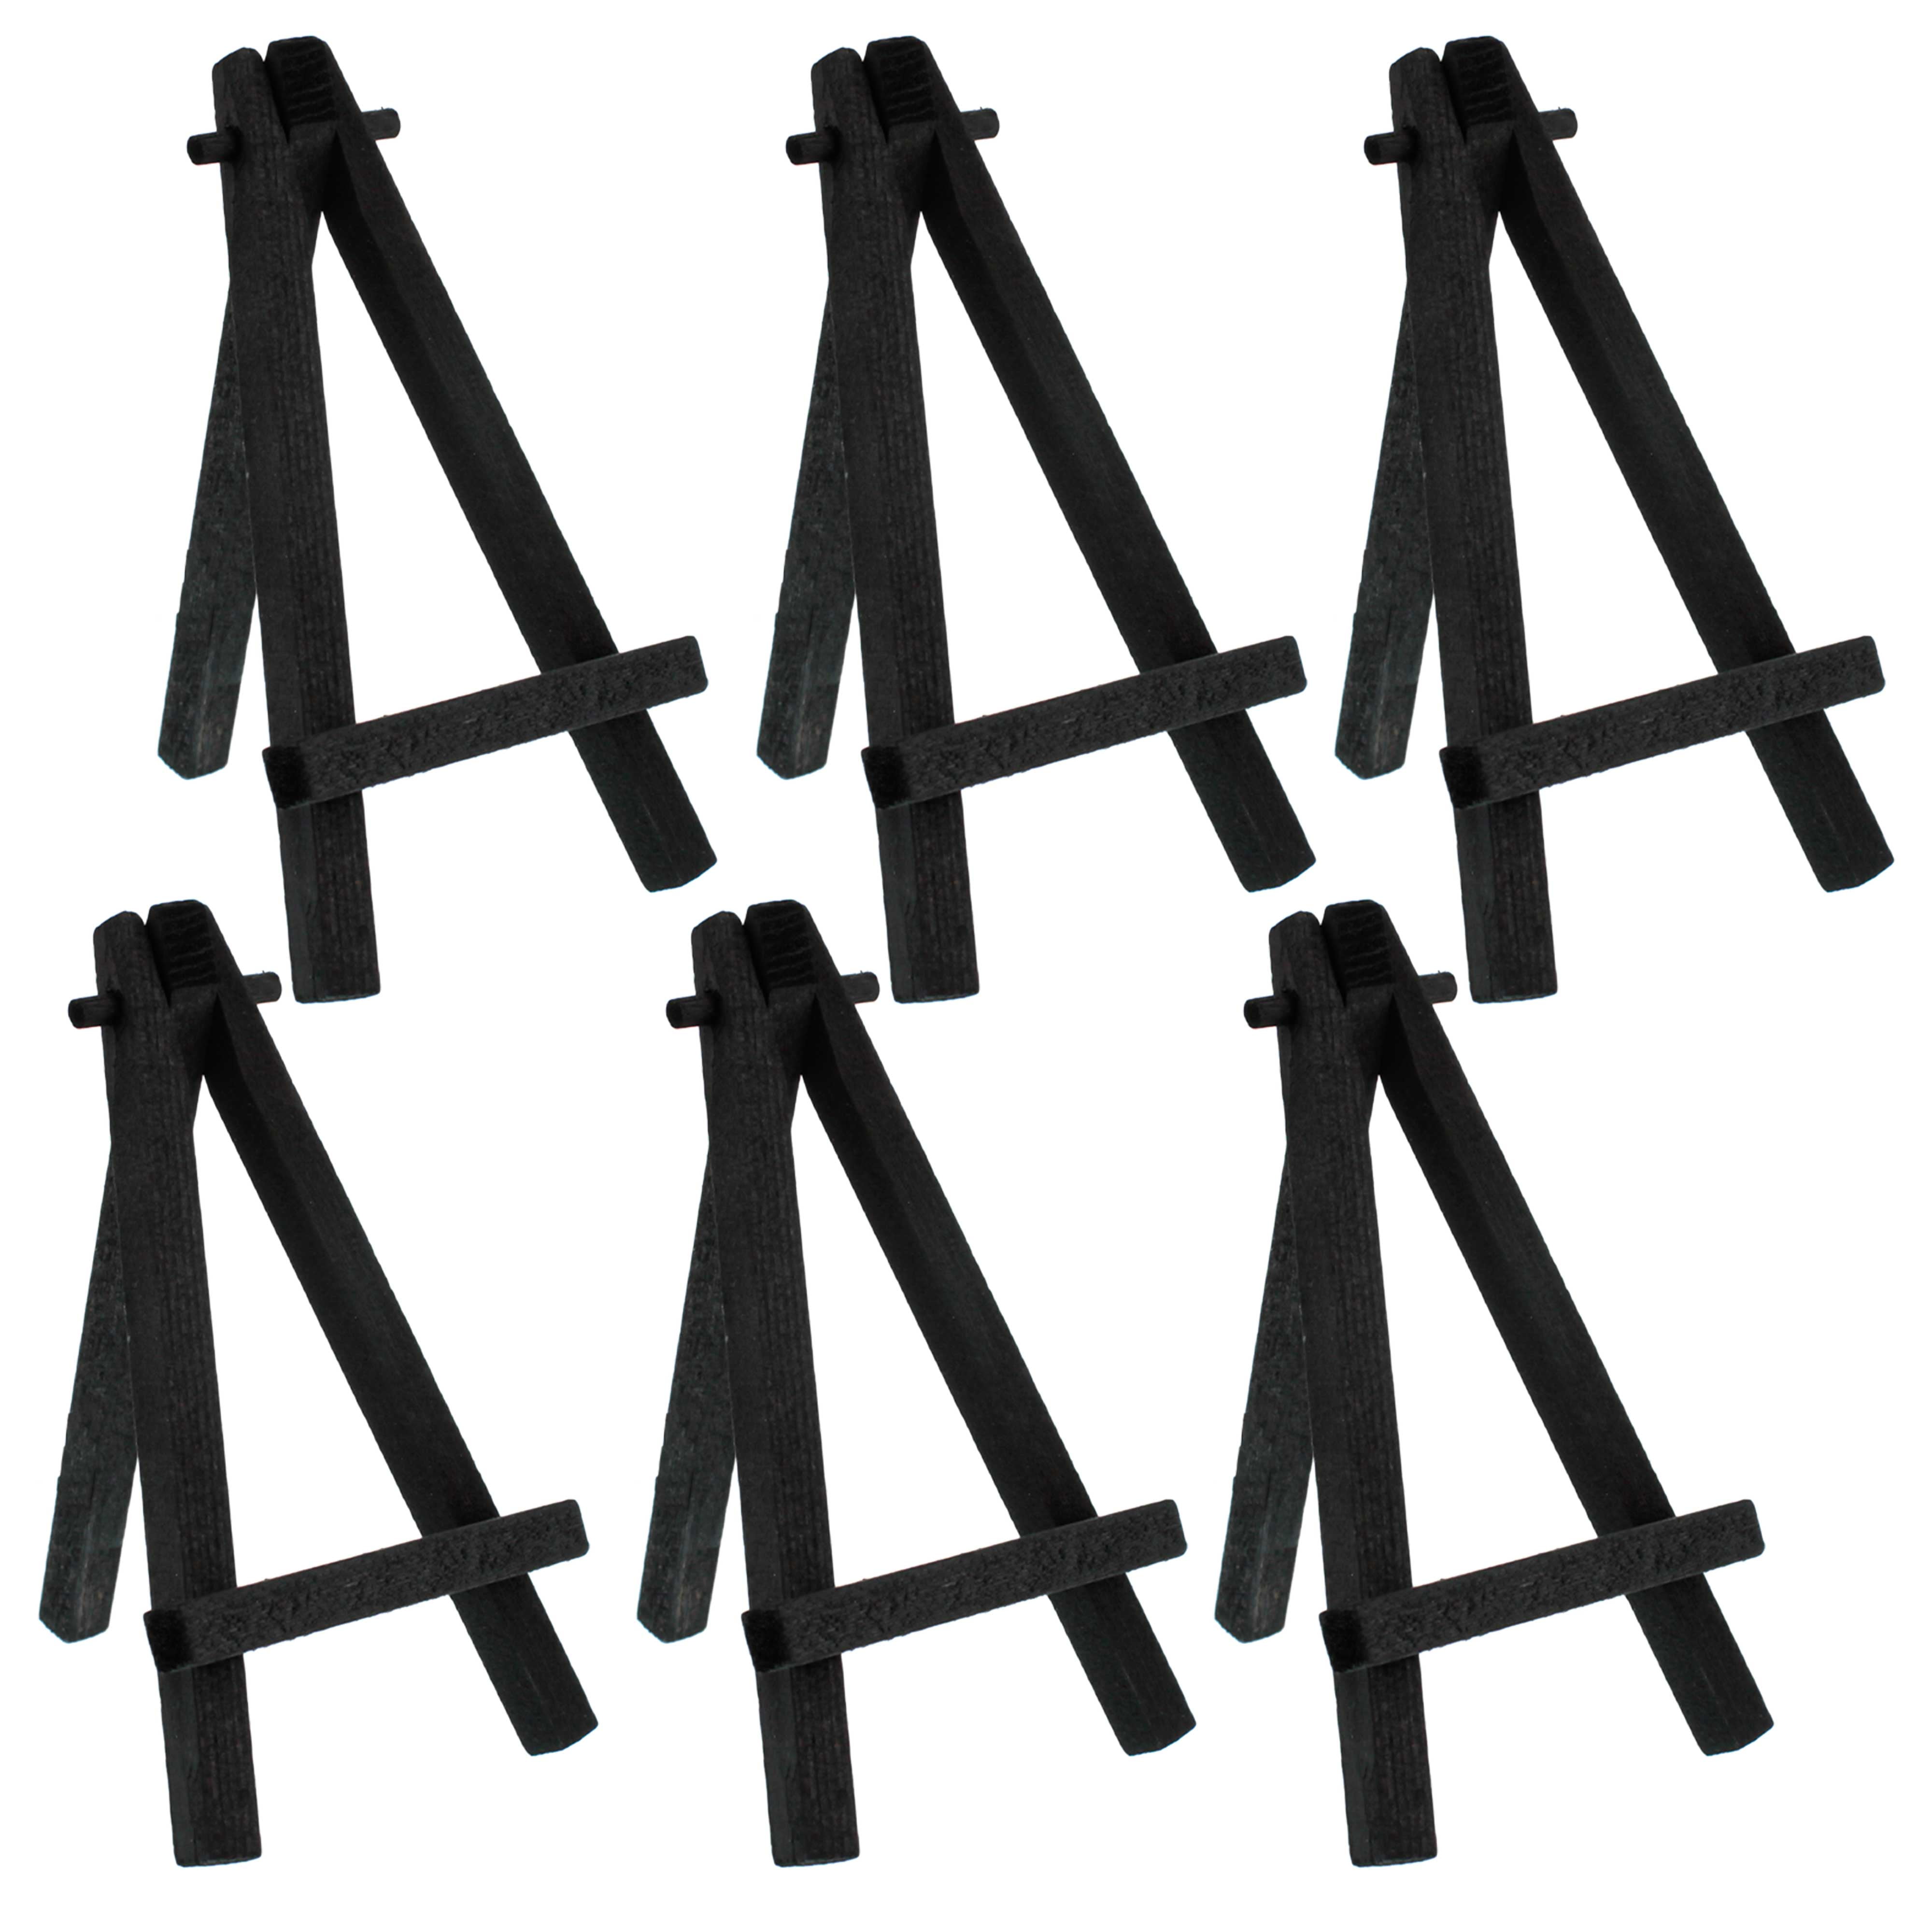 100 x 5" Plastic Display Stands Plates/ Photos/ Craft Art /Easel Style Black 